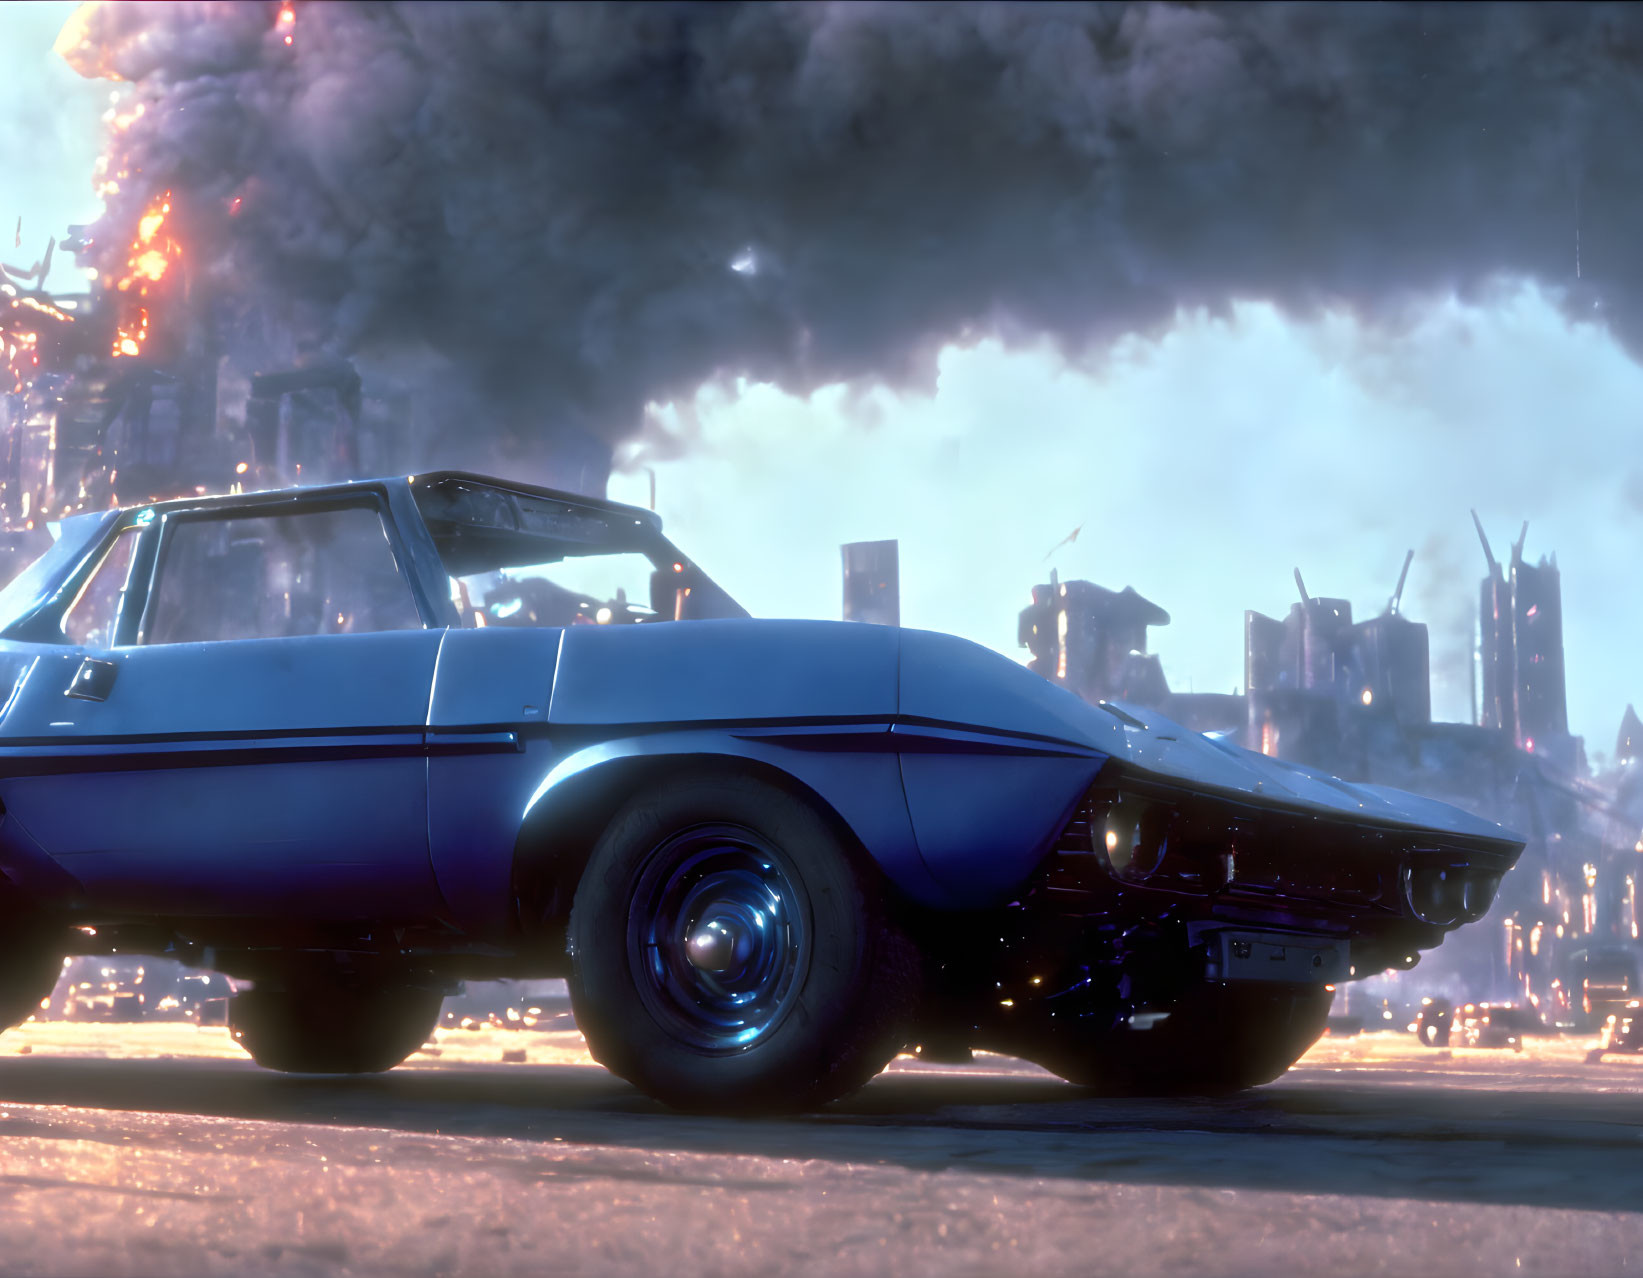 Fast and Furious in blade runner universe